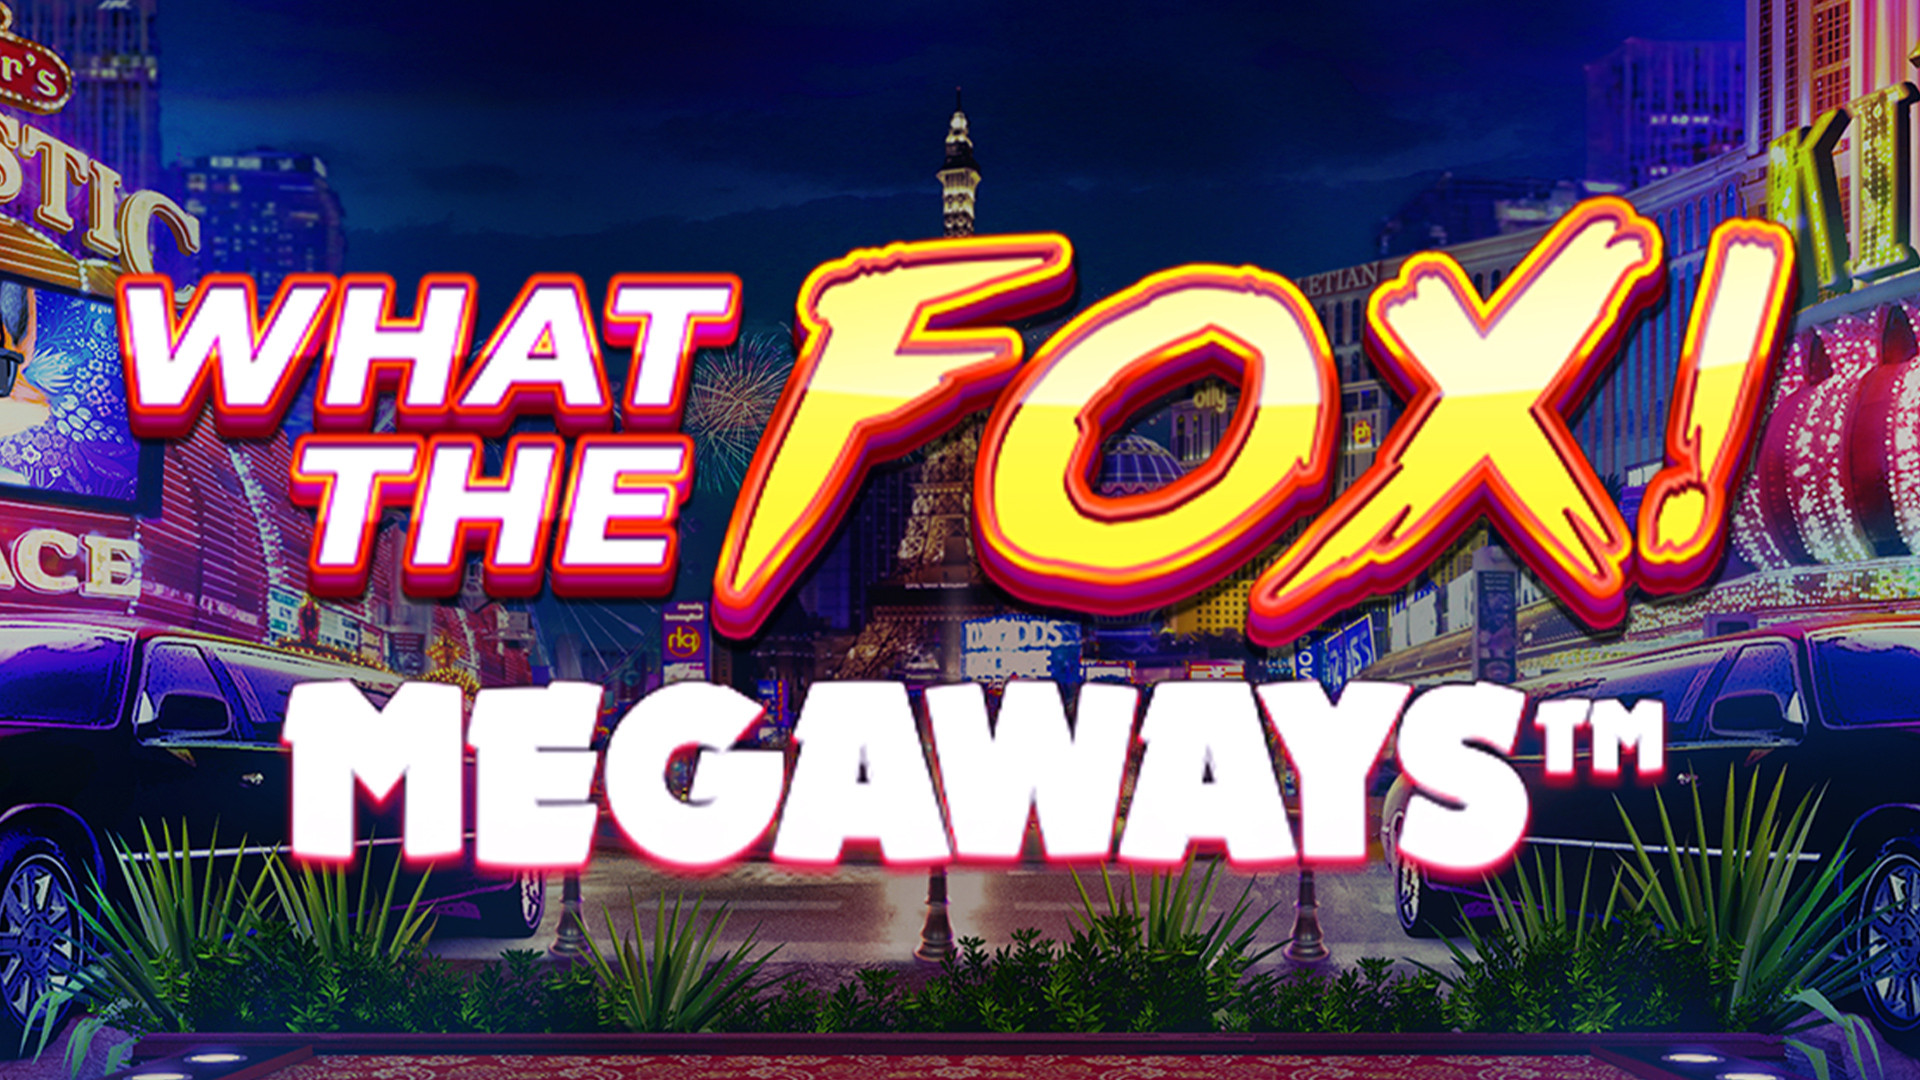 What The Fox MEGAWAYS